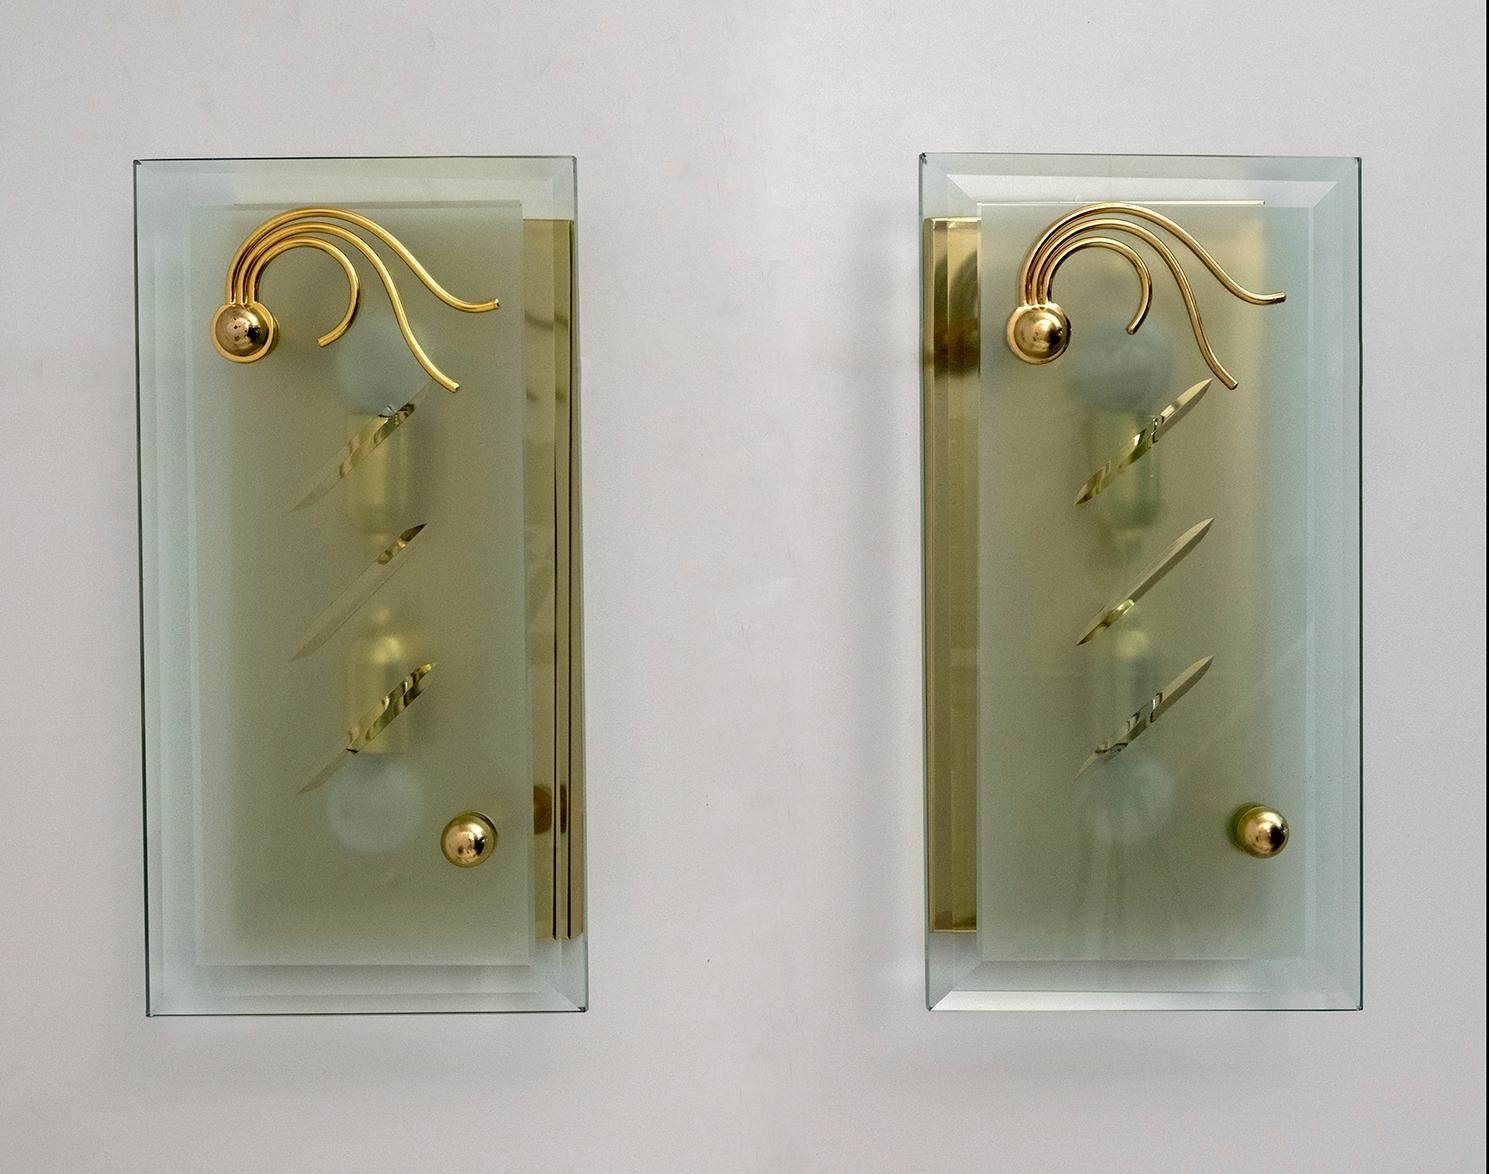 Pair of thick cut crystal sconces, the structure is brass. Italian production of the 70s

